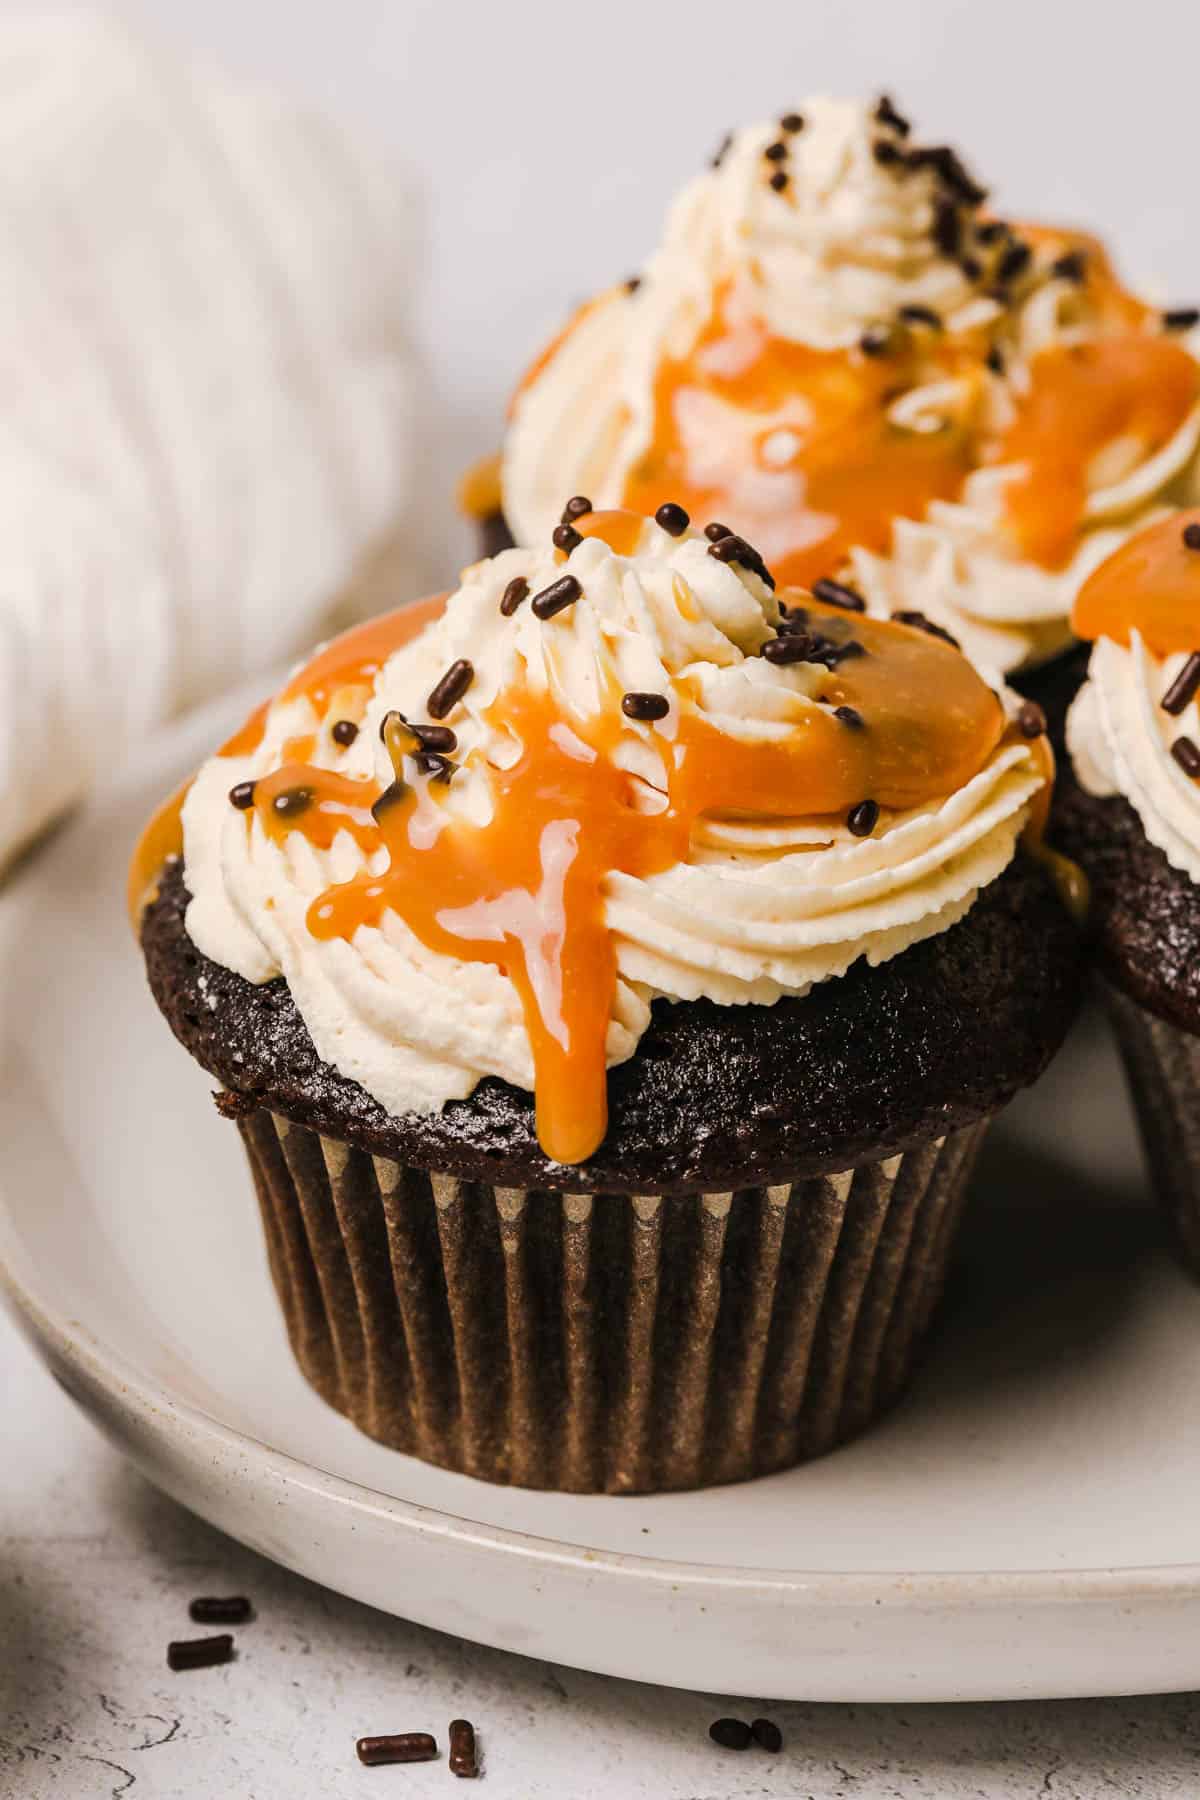 cupcakes drizzled with caramel sauce